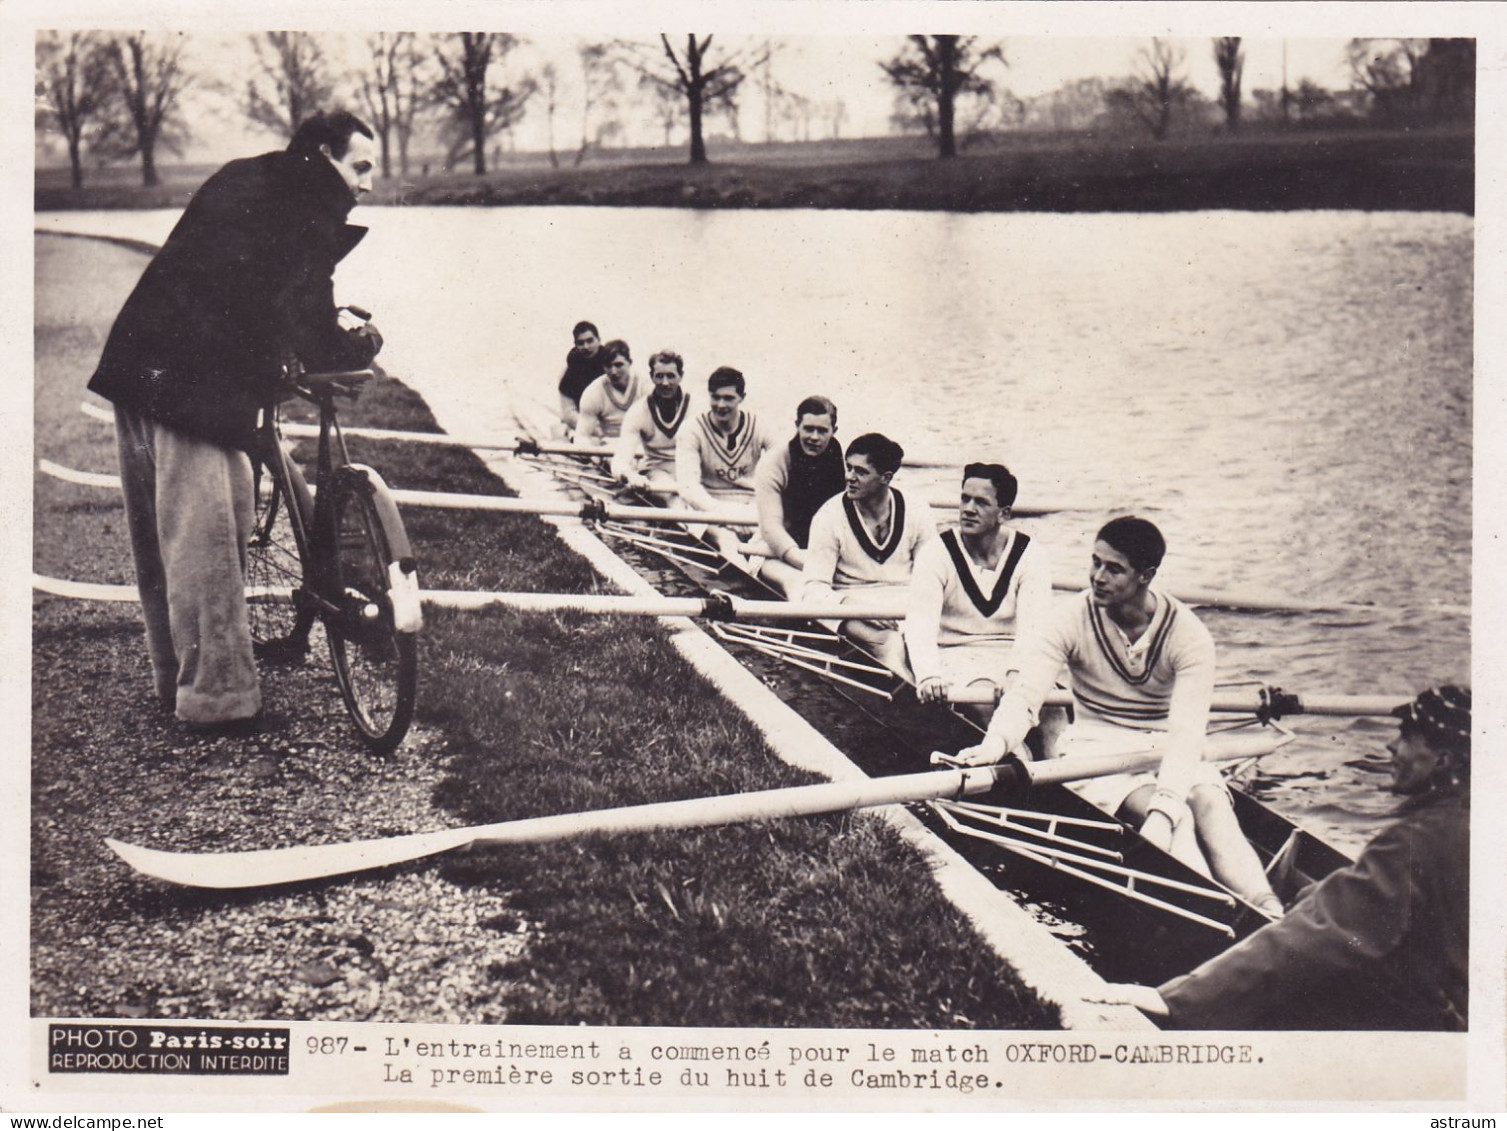 Cpa / Photo - Ang - Cambridge - Sport Aviron - 1st Outing Training For The Cambridge Team - Rowing